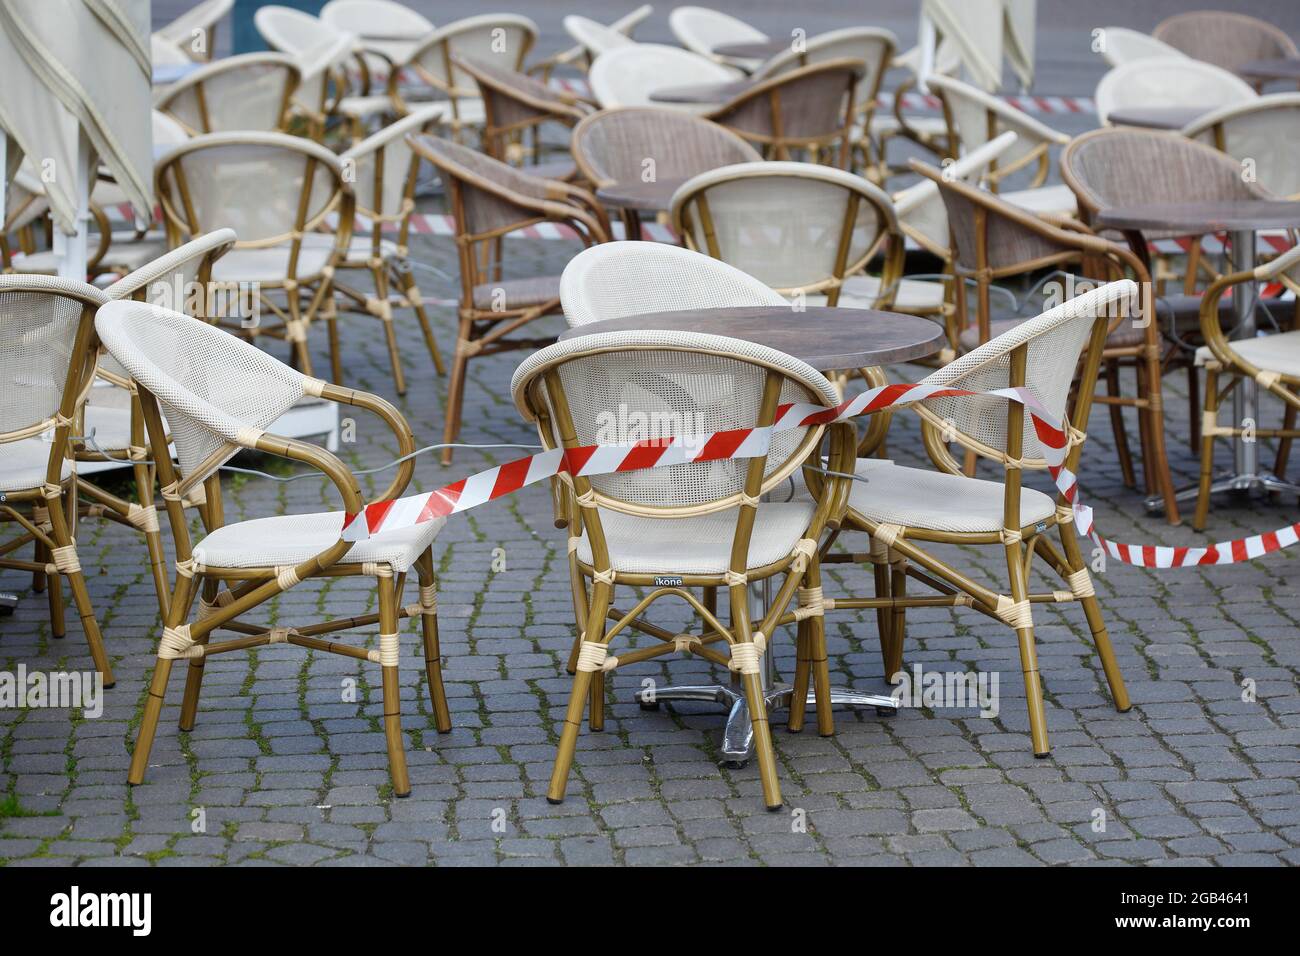 Barrier Tape And Empty Chairs And Tables Of A Cafe On The Bremen Market Place, Closed Due To Coronavirus, Bremen, Germany, Europe Stock Photo